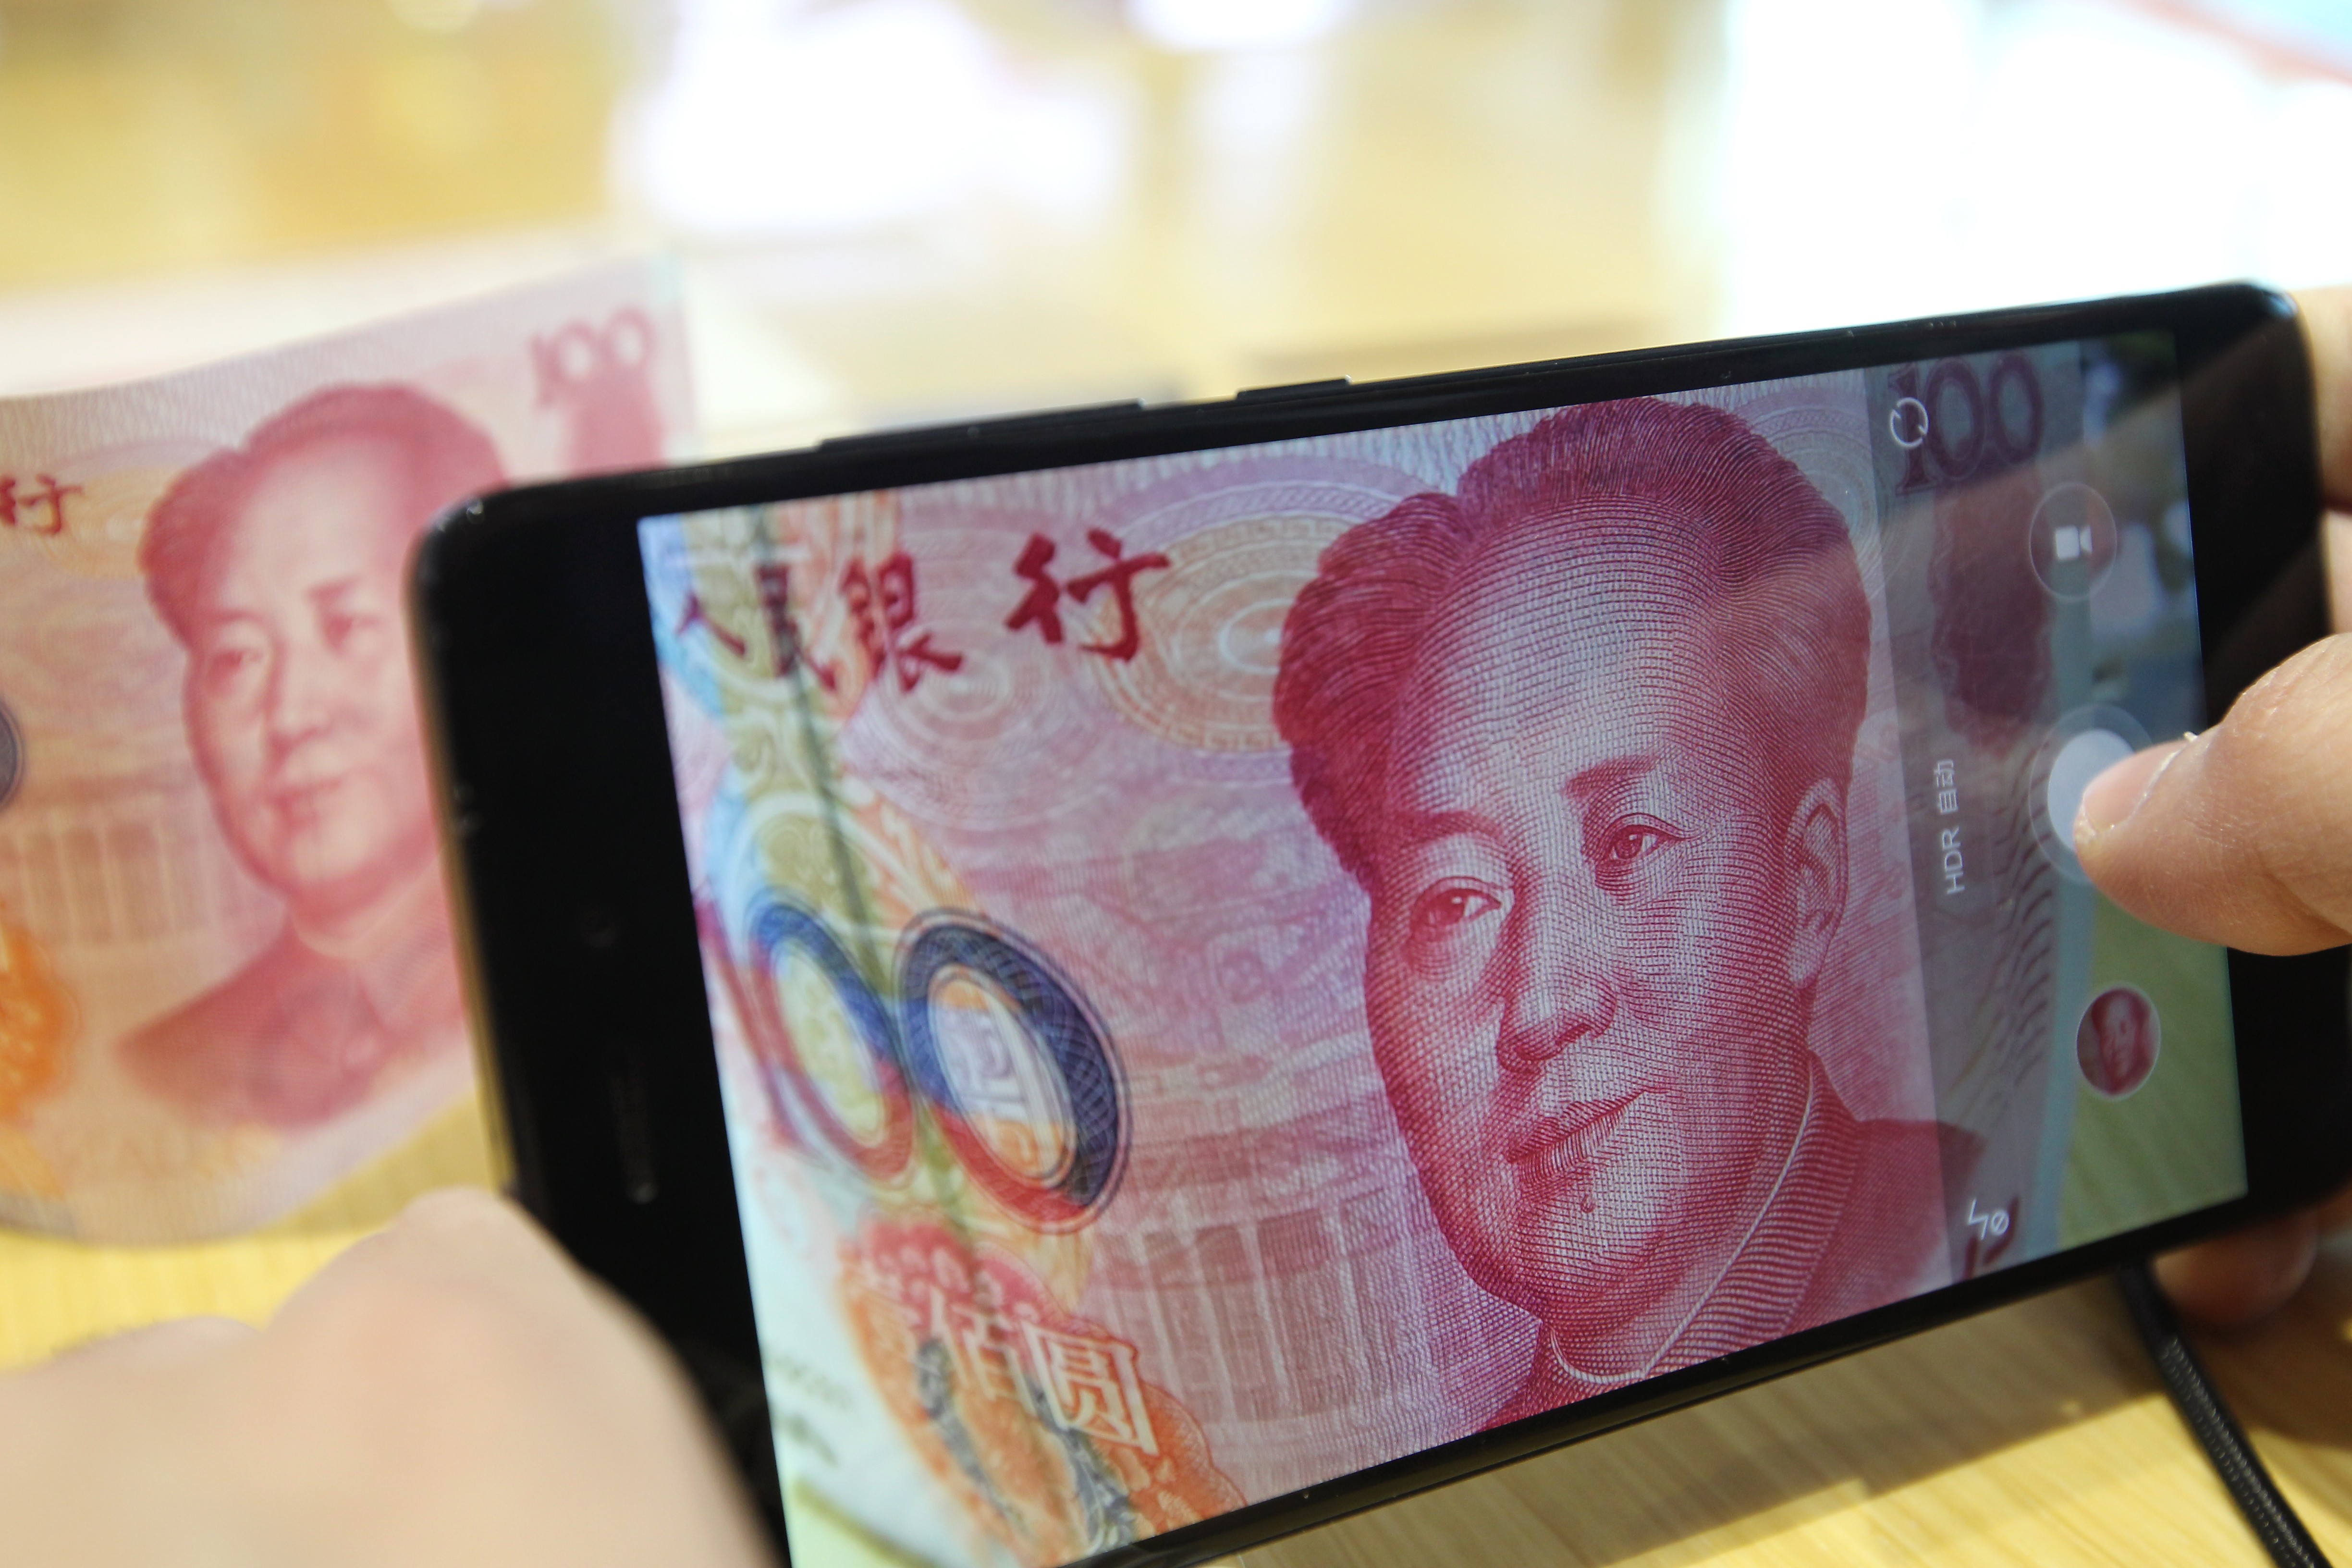 China’s P2P sector found itself racked by scandal after an initial boom. Photo: Simon Song